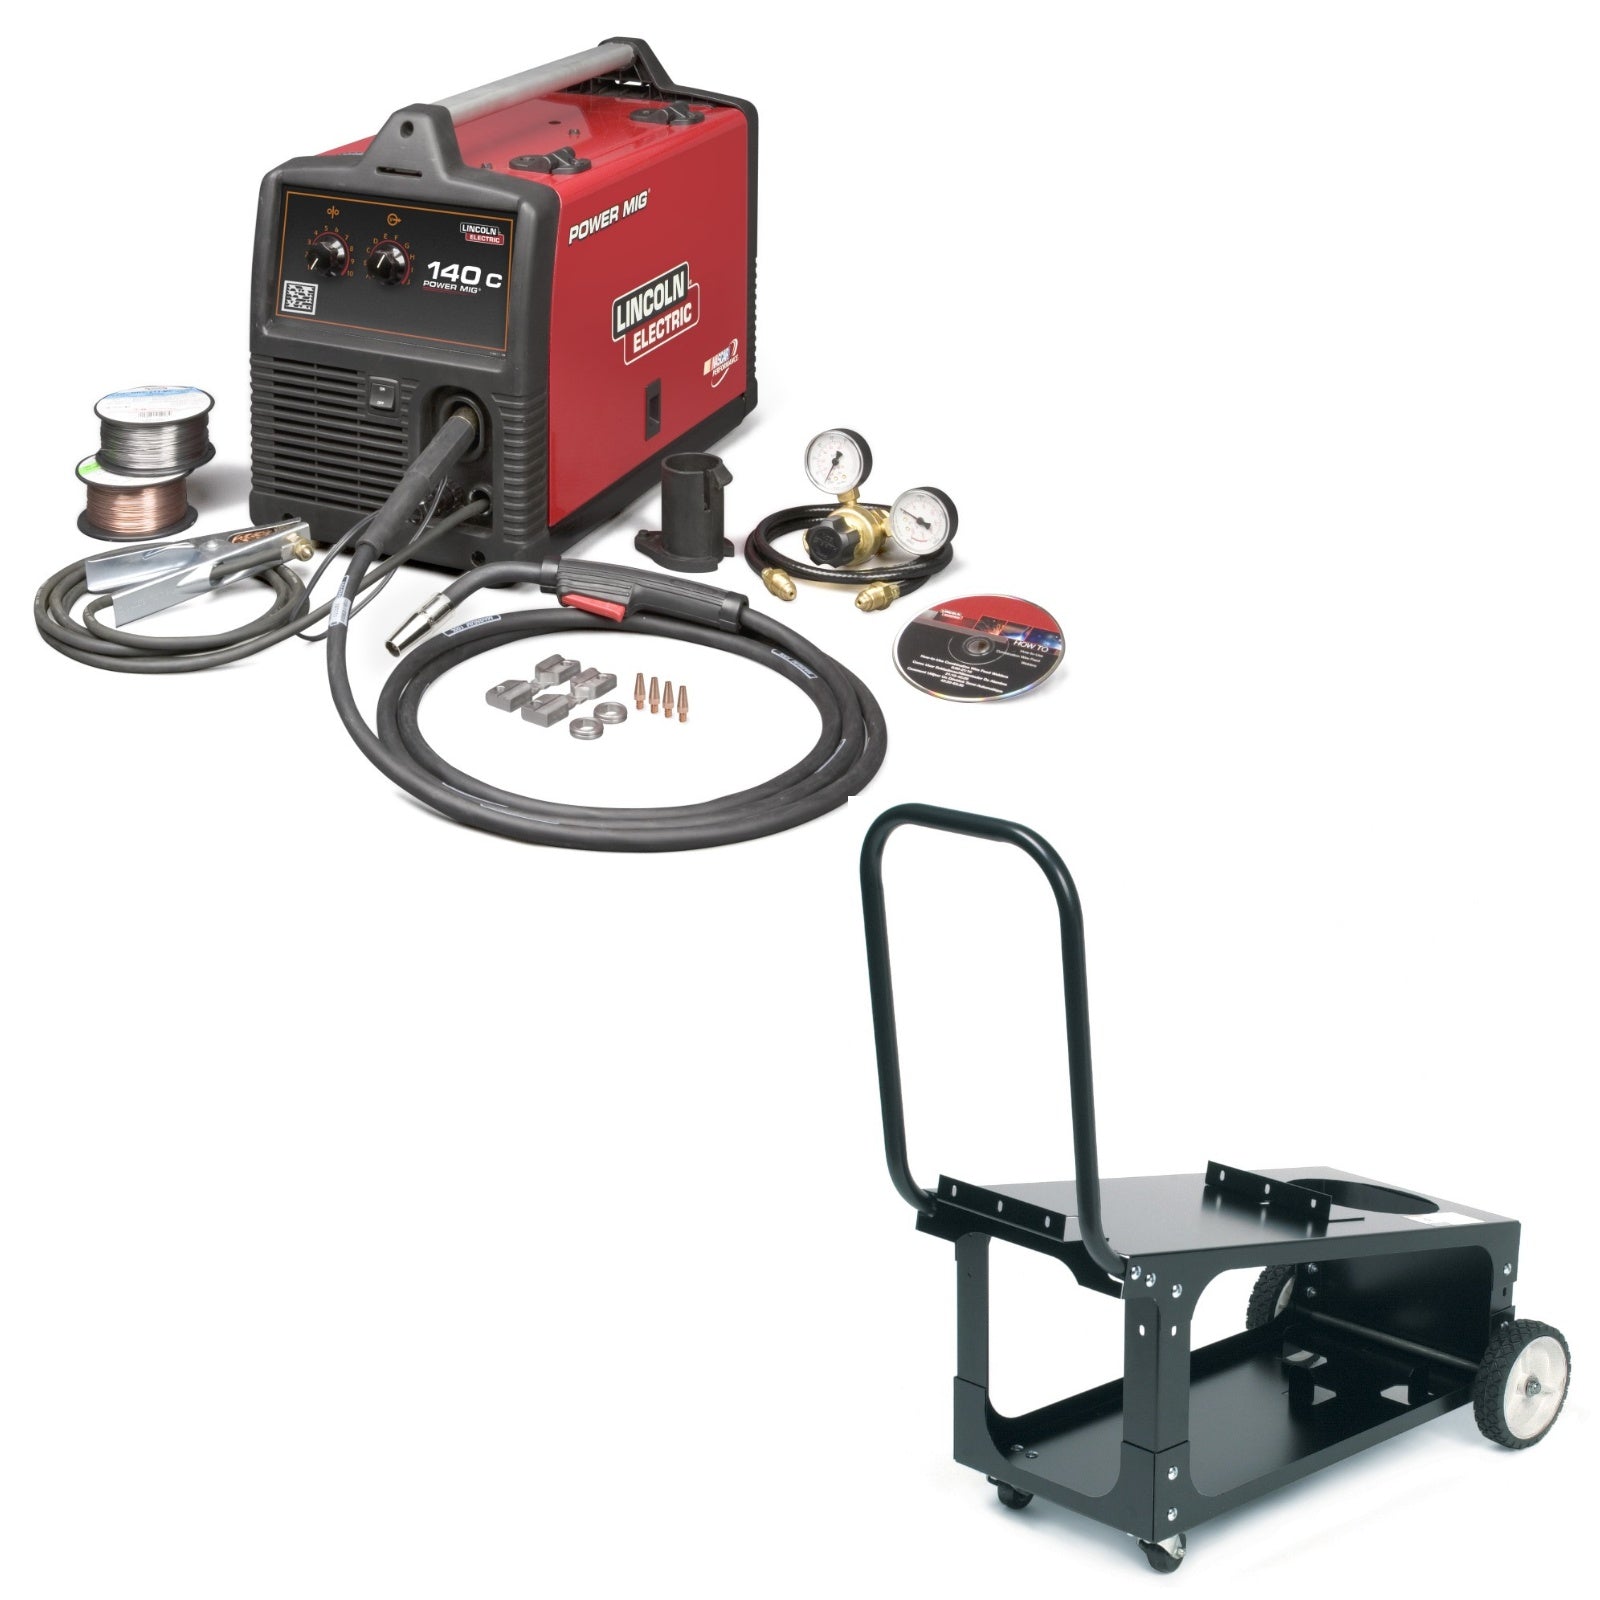 Lincoln Power MIG 140C MIG Welder with Cart (K2471-1)